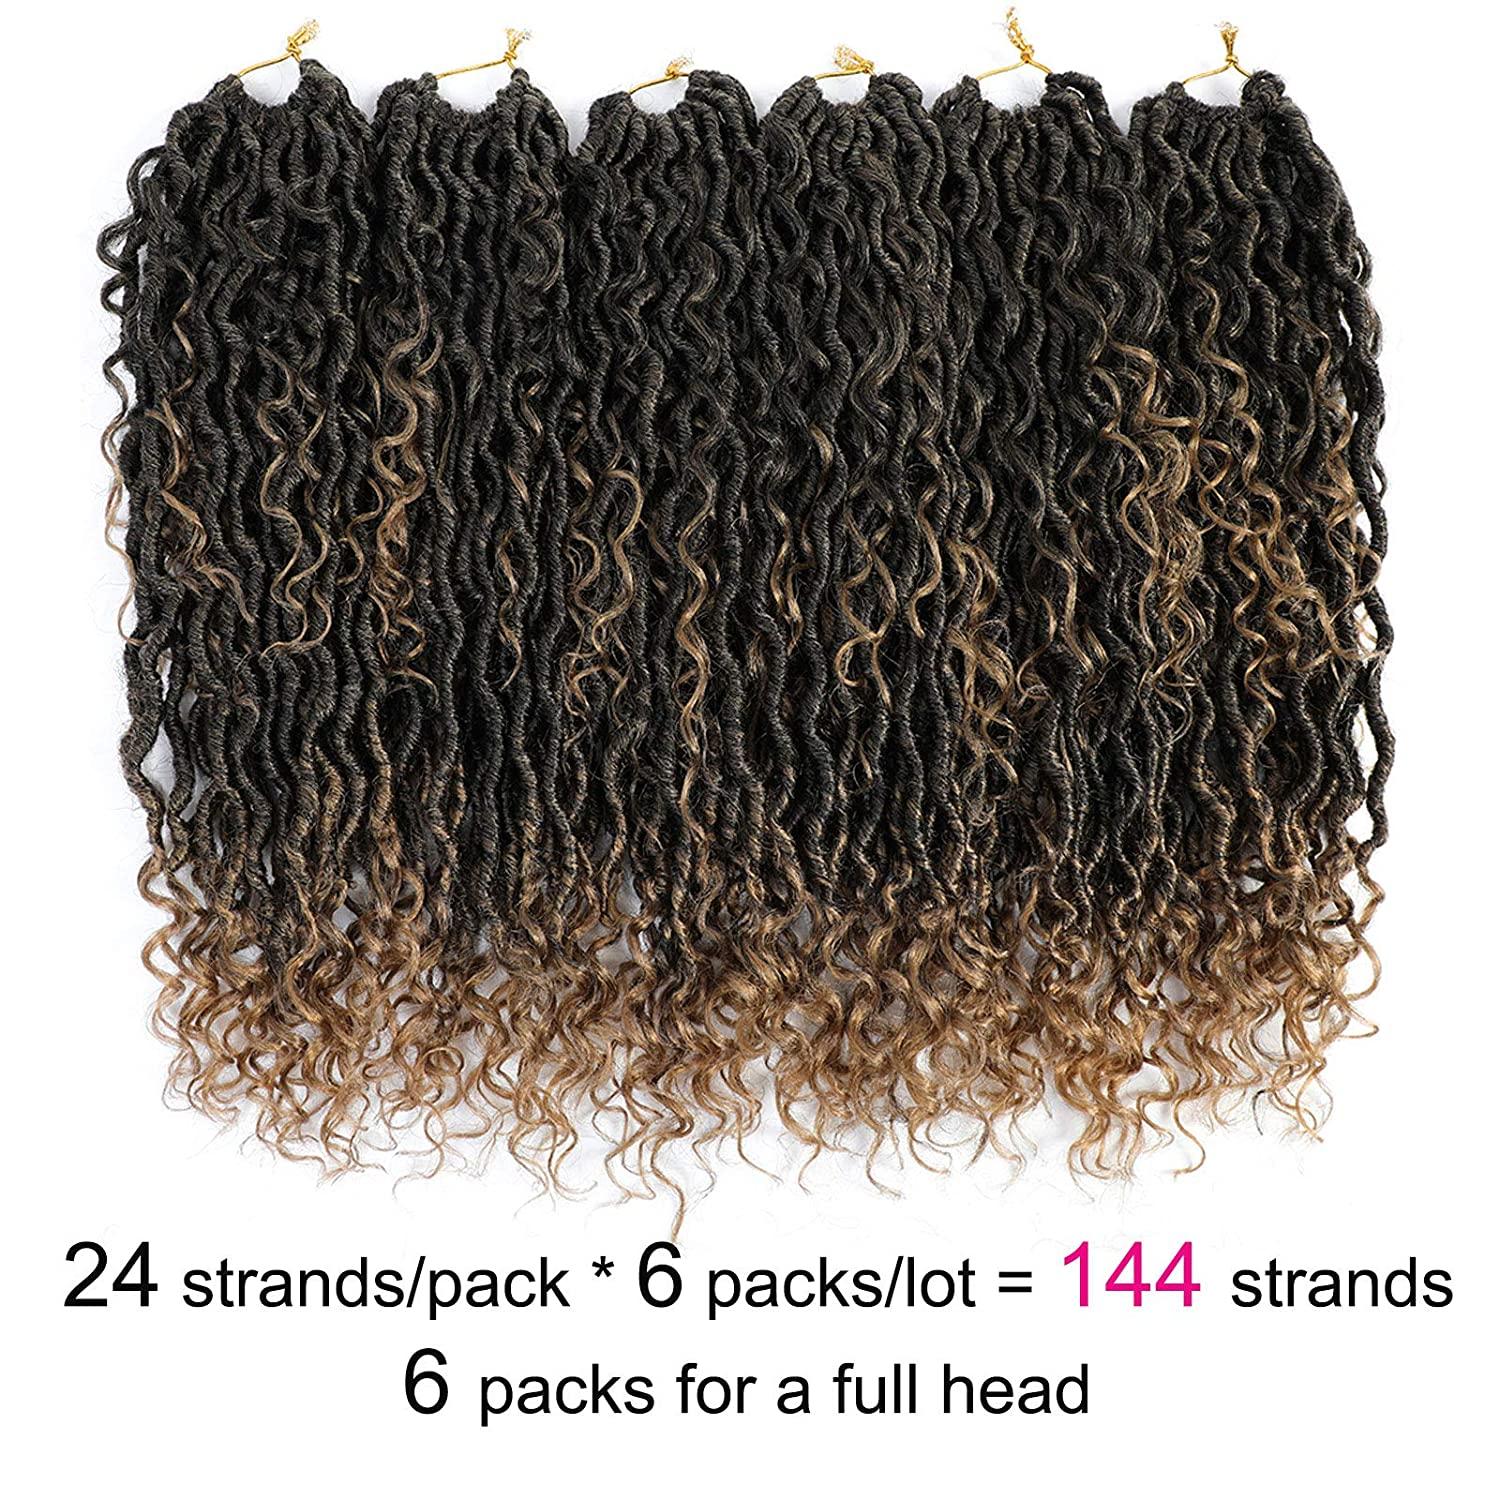 1 Packs Curly Faux Locs Crochet Hair, 18 Inch Crochet Hair Synthetic Braids,  Boho Style Hair Extensions (14 Inch,18 Inch, 22 Inch, 1 Packs, T1B/27)